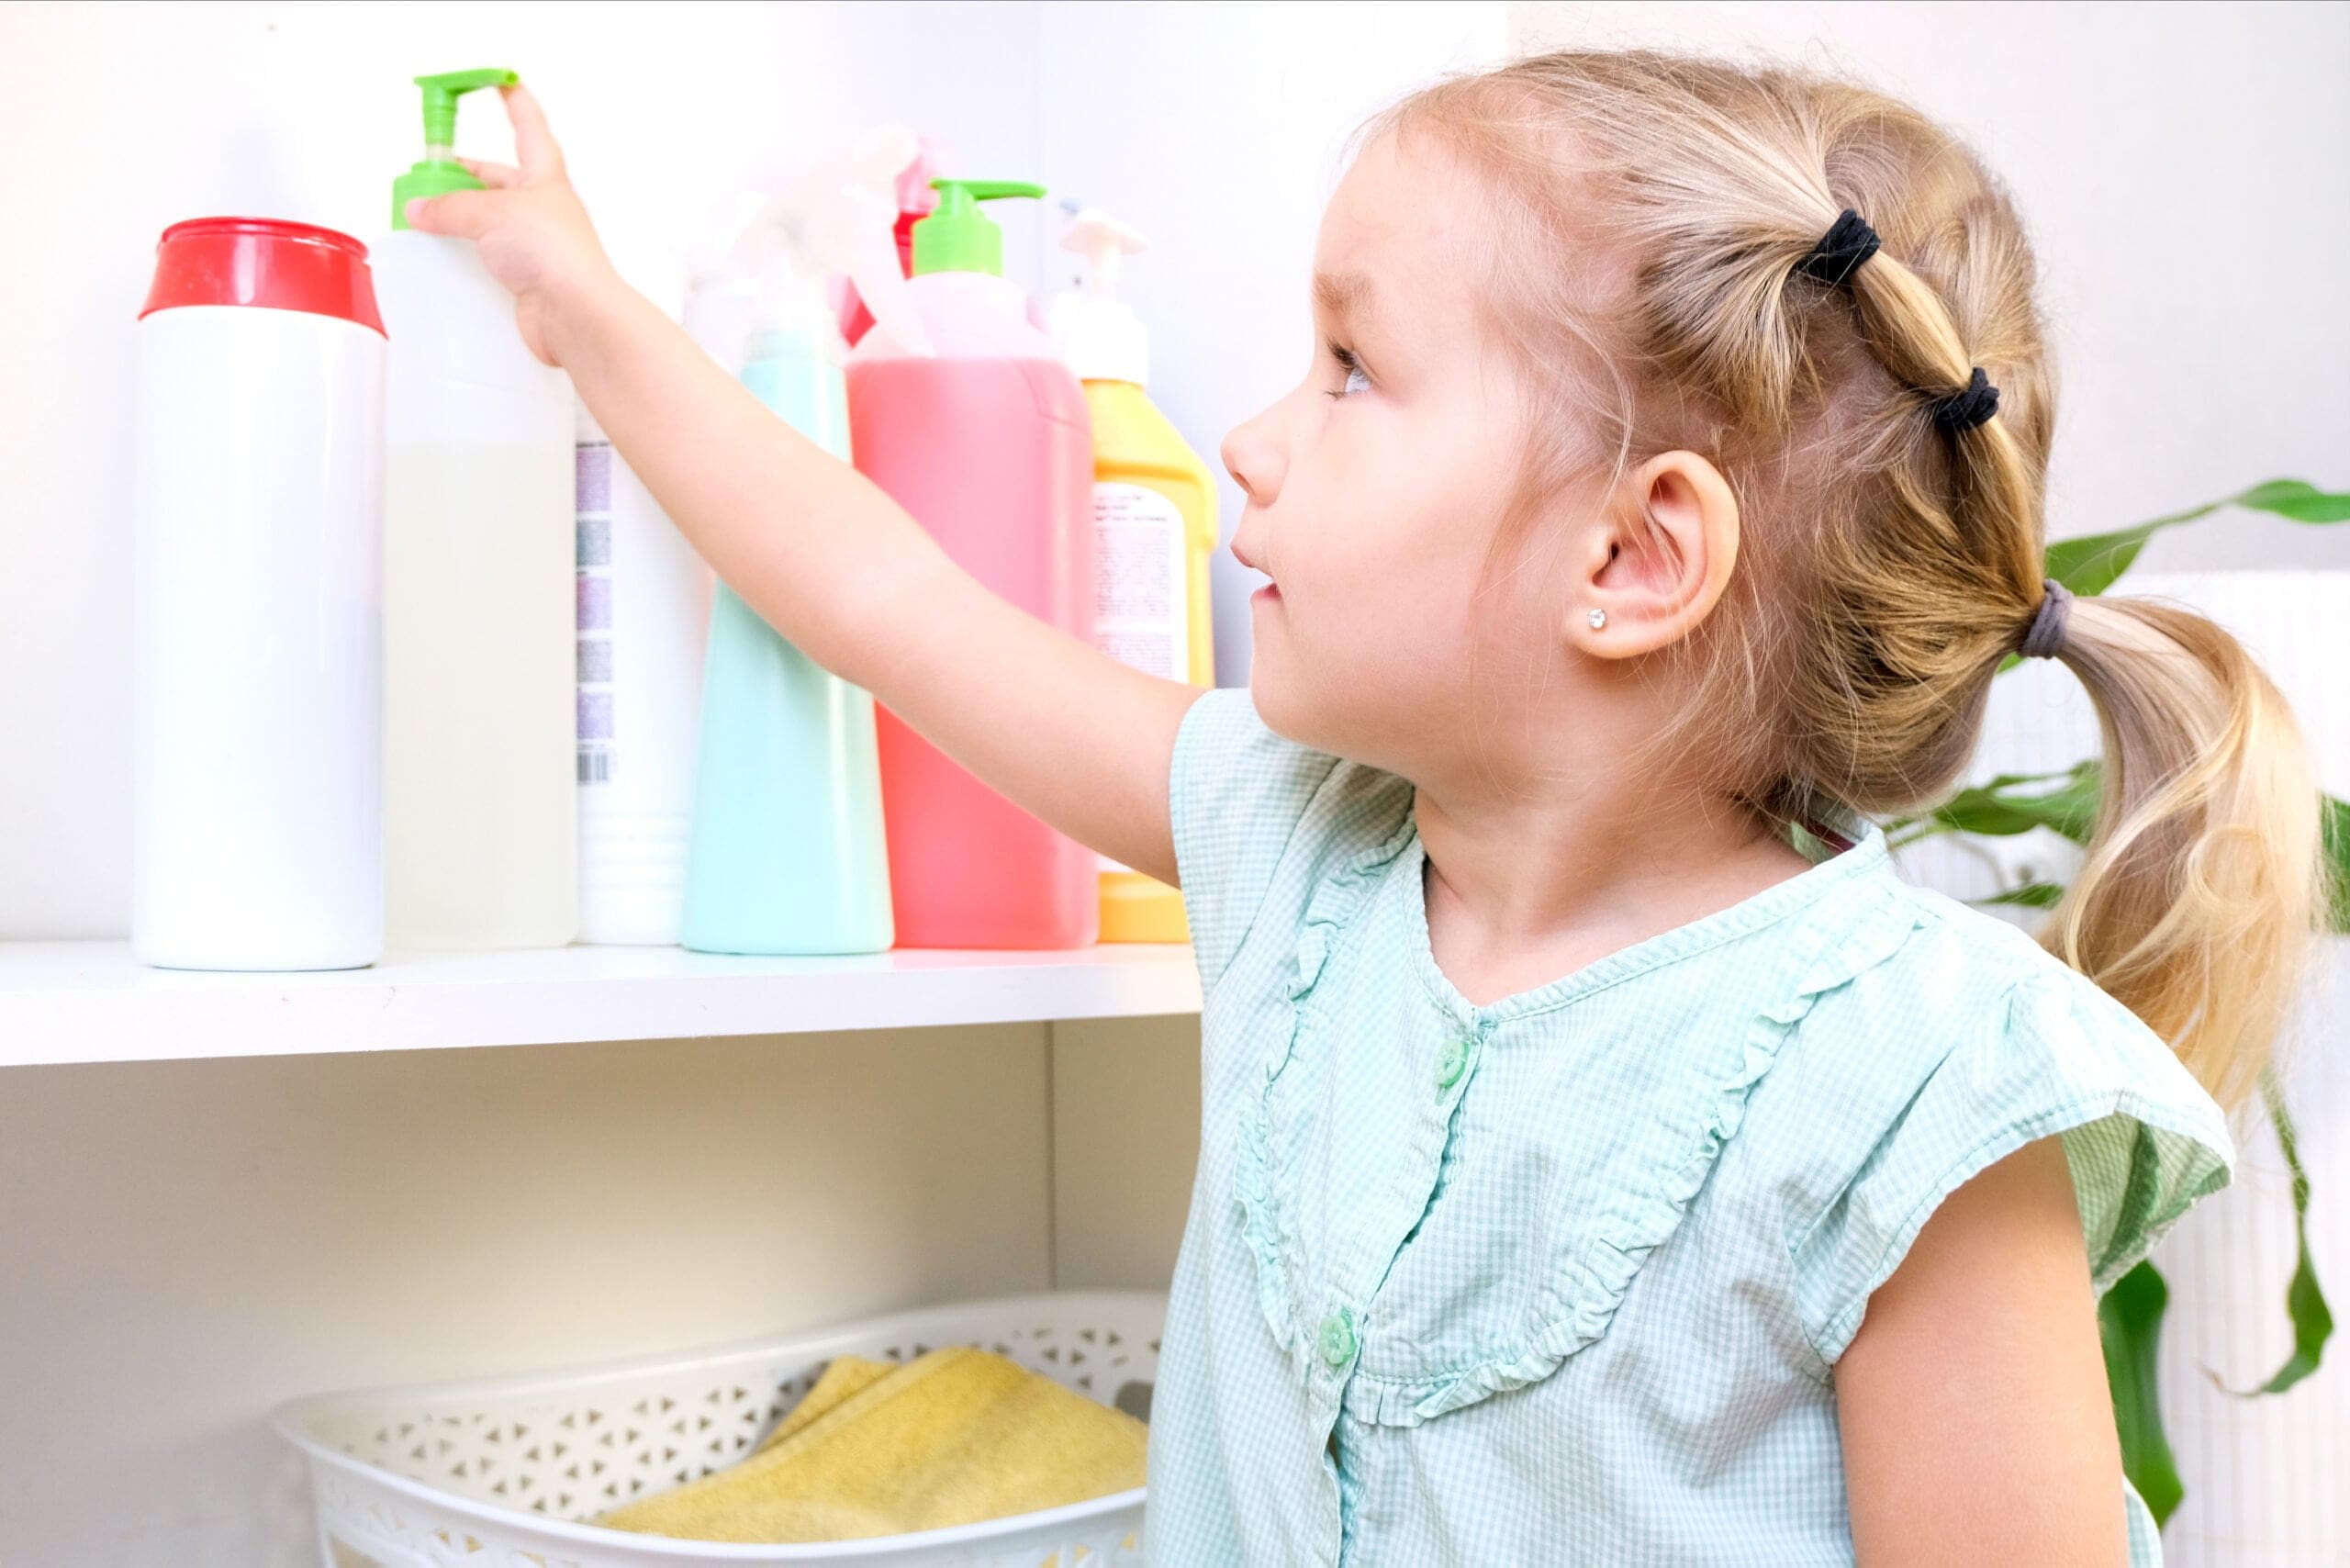 toddler-touches-bottles-household-chemicals-household-cleaning-products-dangerous-situation-after-not-childproofing